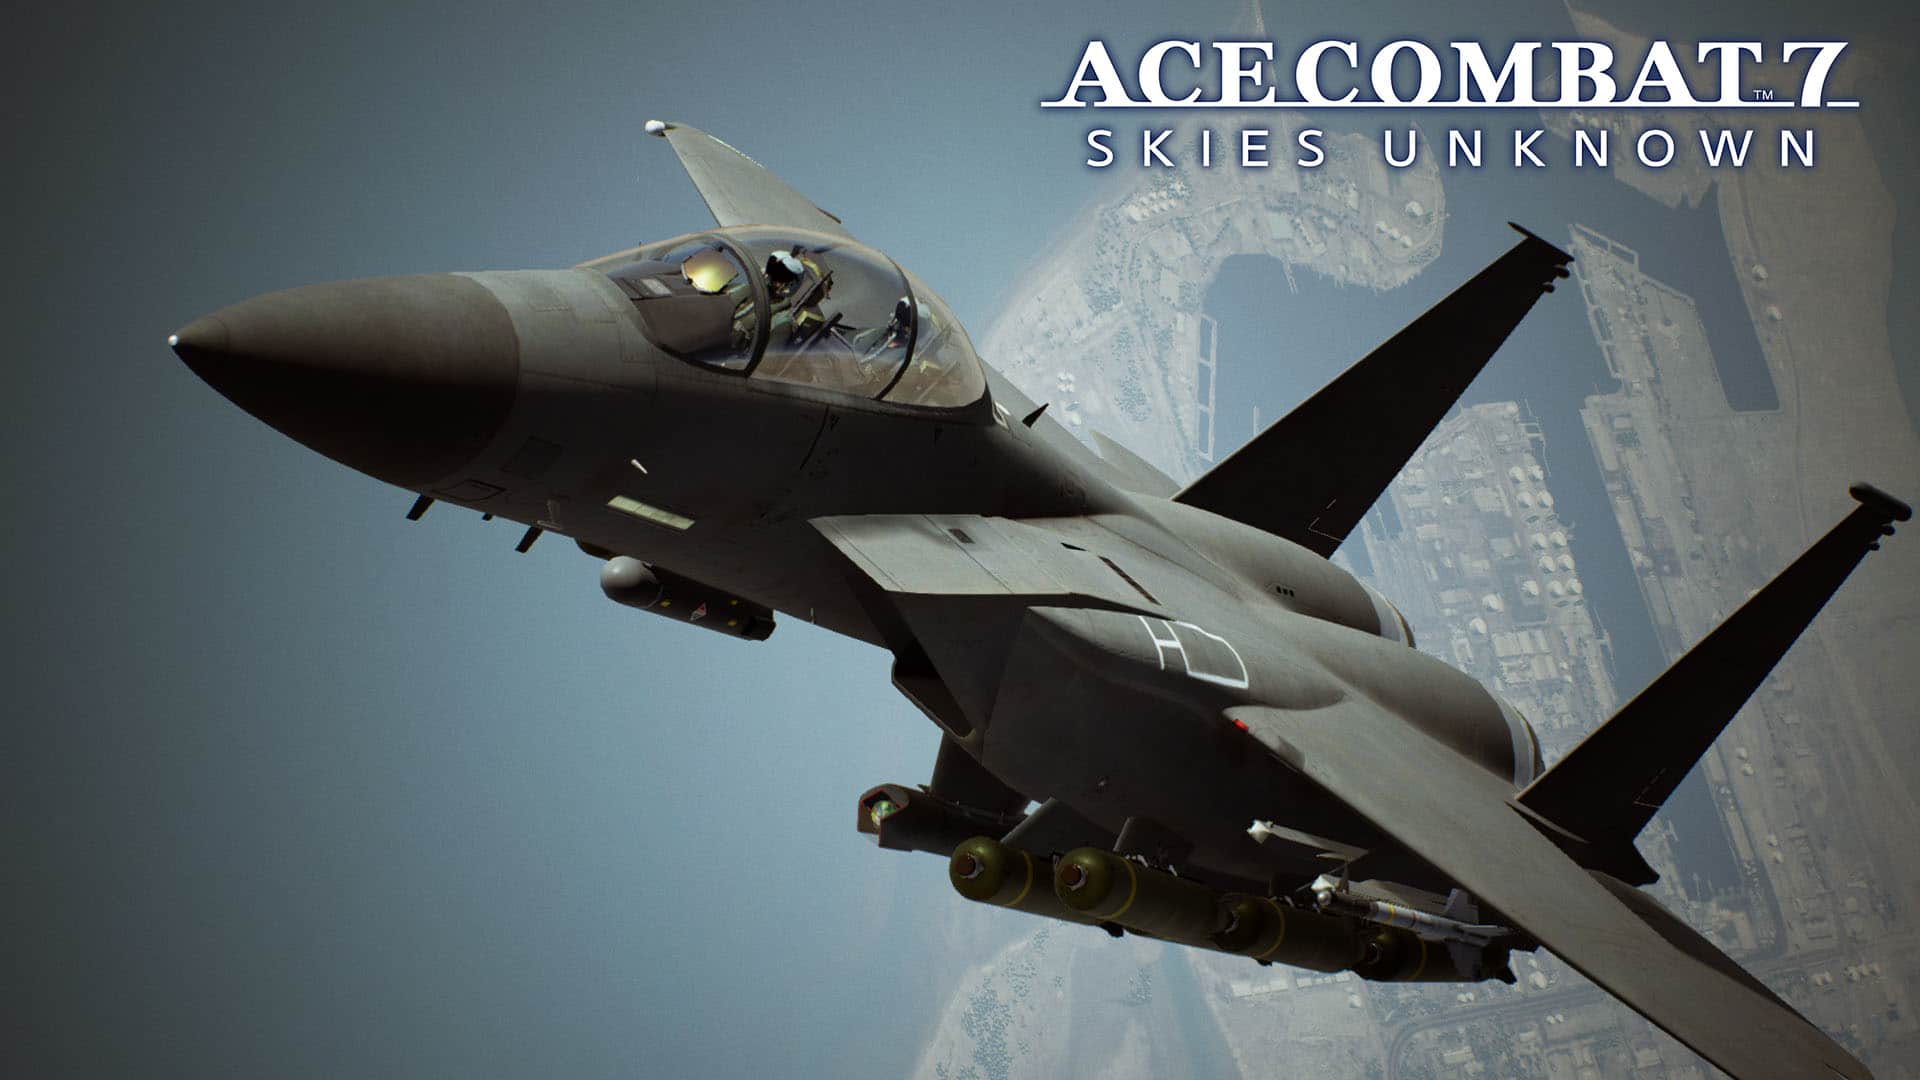 Ace Combat 7, Skies Unknown (PC) Review, GamersRD